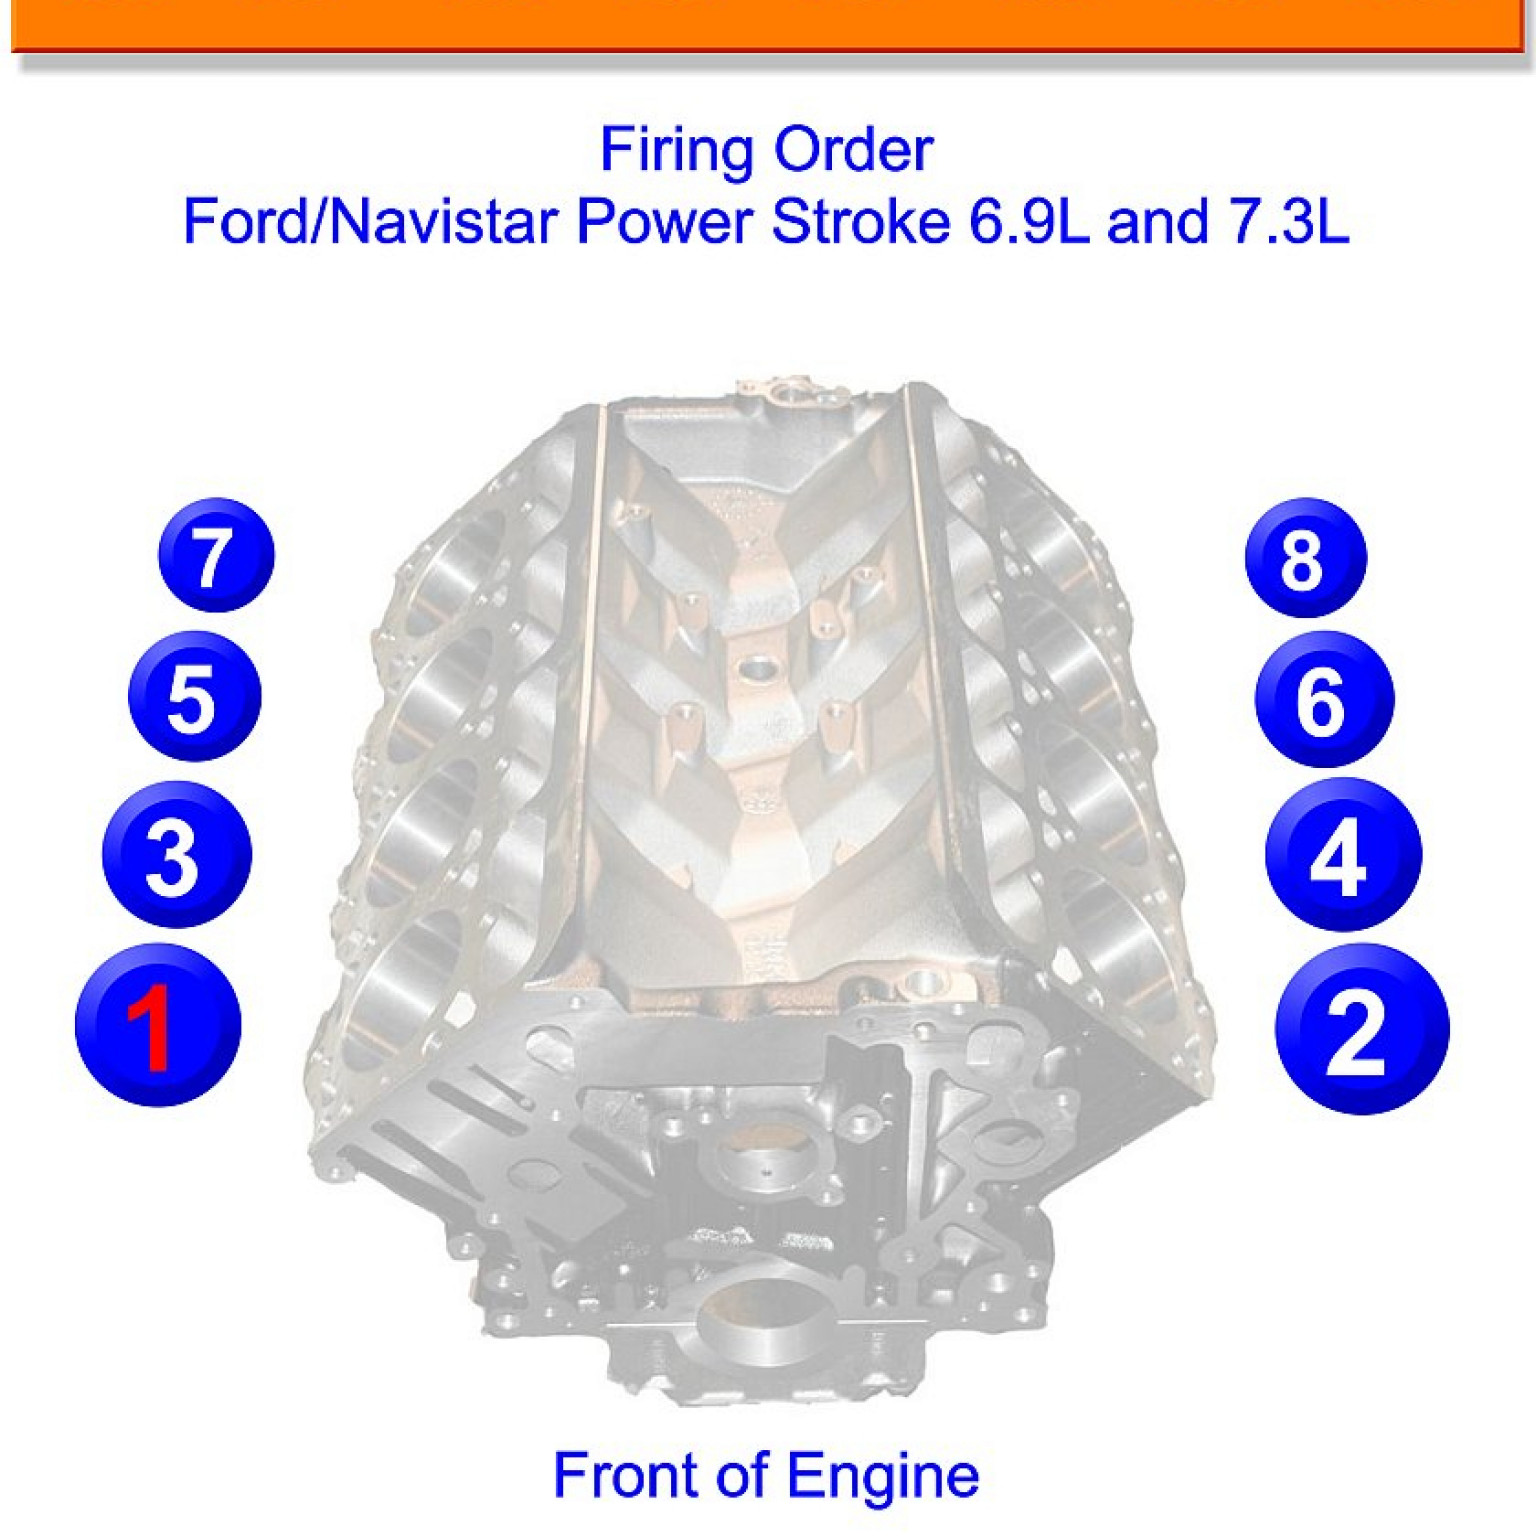 Ford 200 Inline 6 Firing Order Wiring And Printable